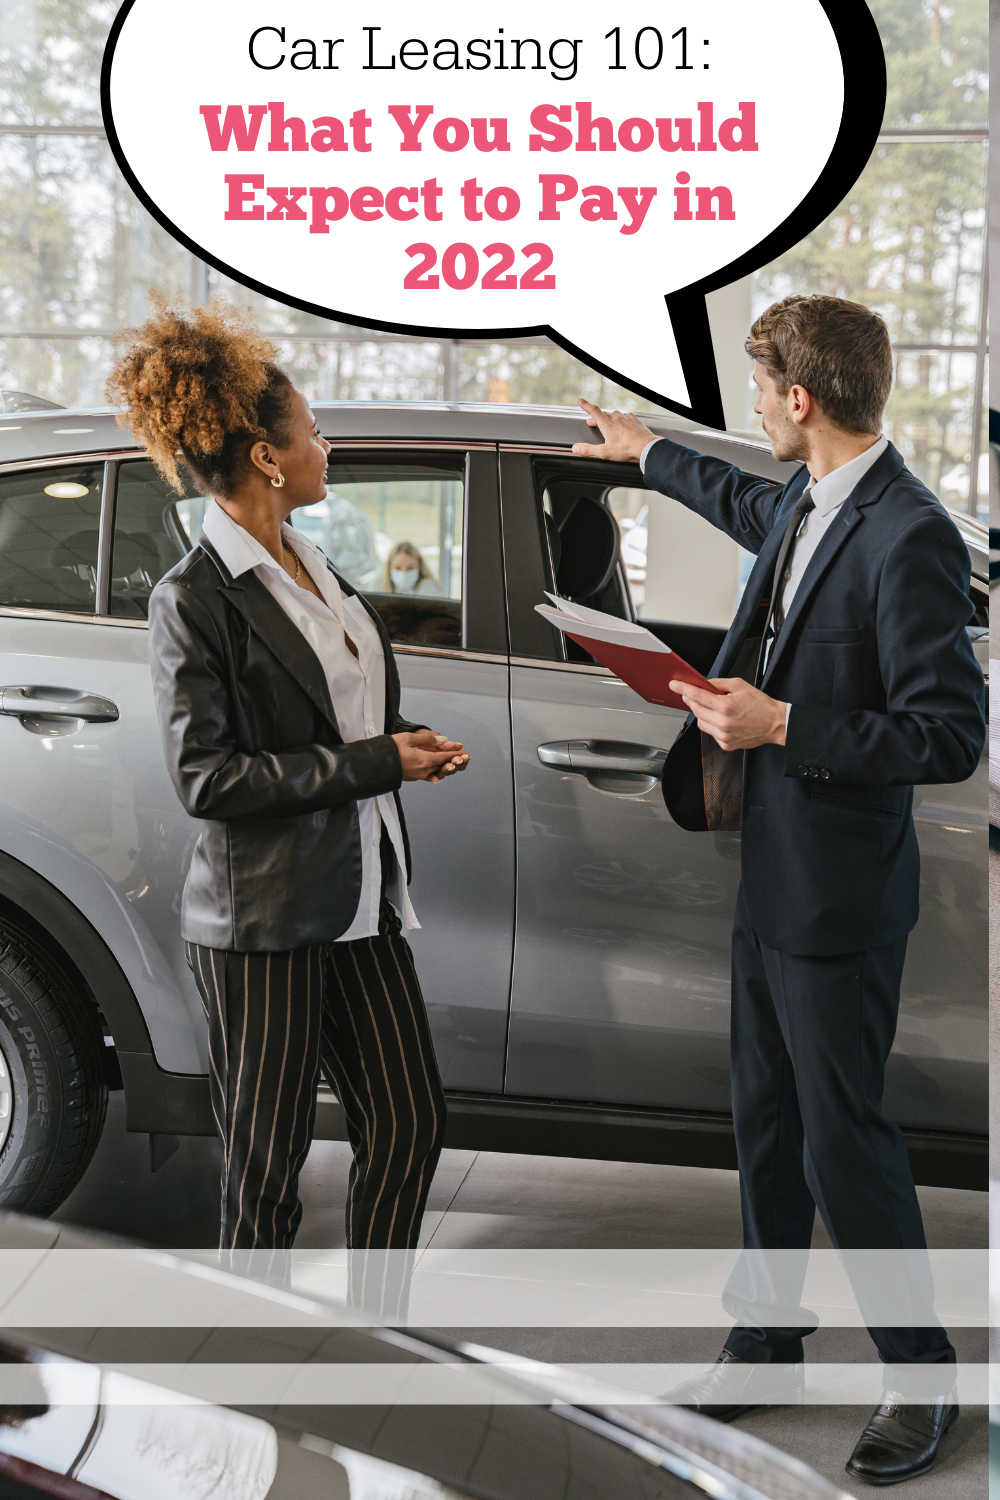 Car Leasing 101: What You Should Expect to Pay in 2022